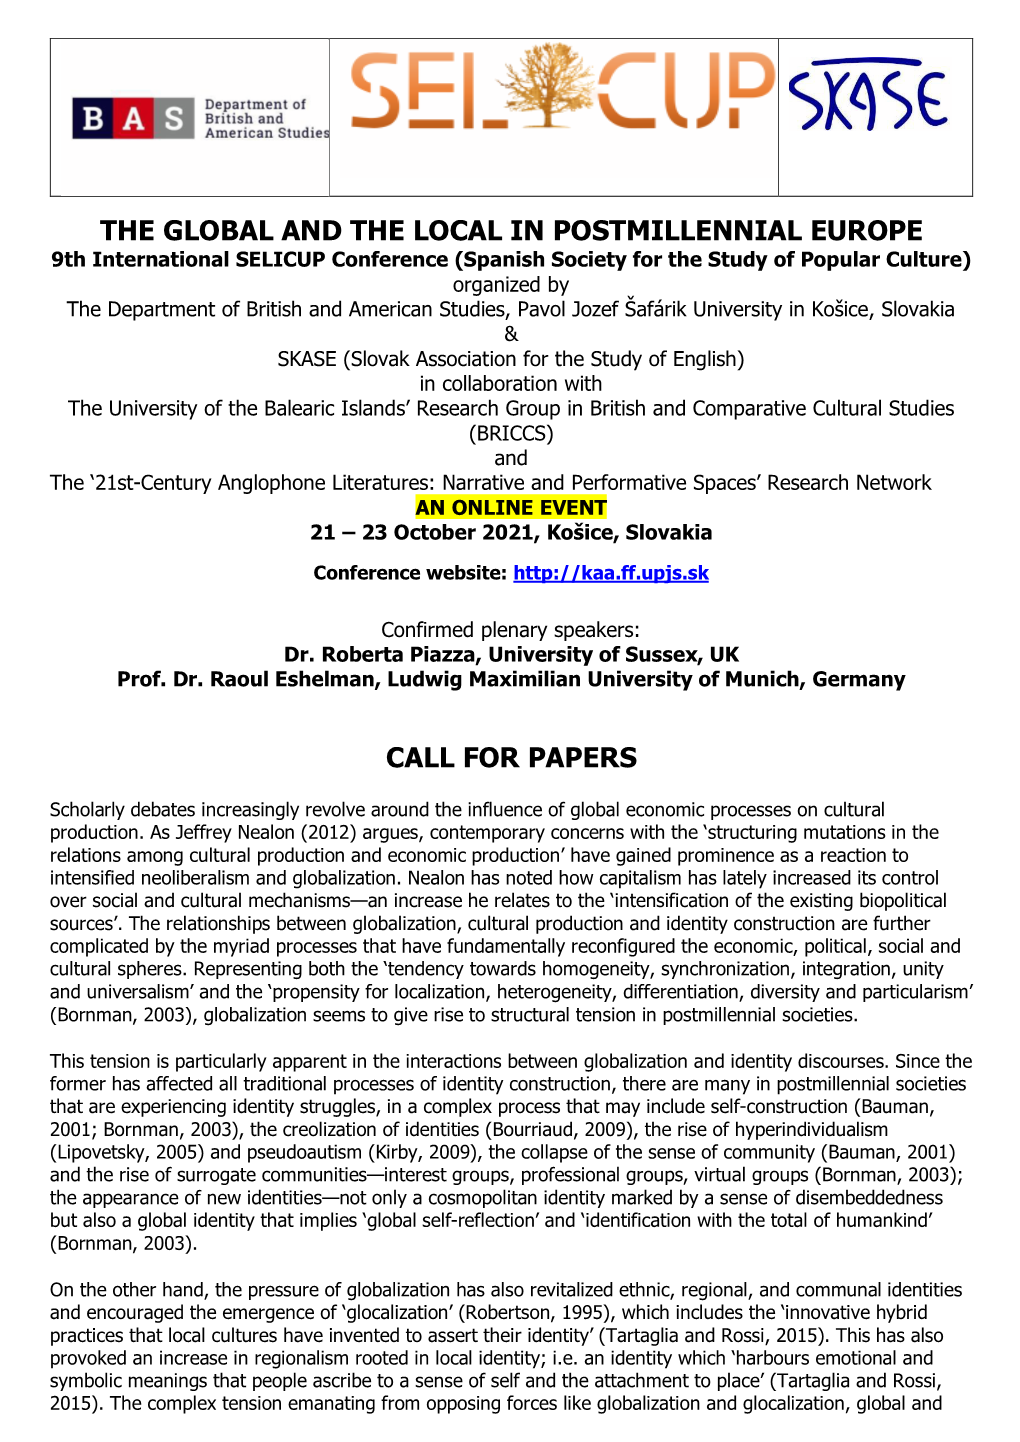 The Global and the Local in Postmillennial Europe Call for Papers